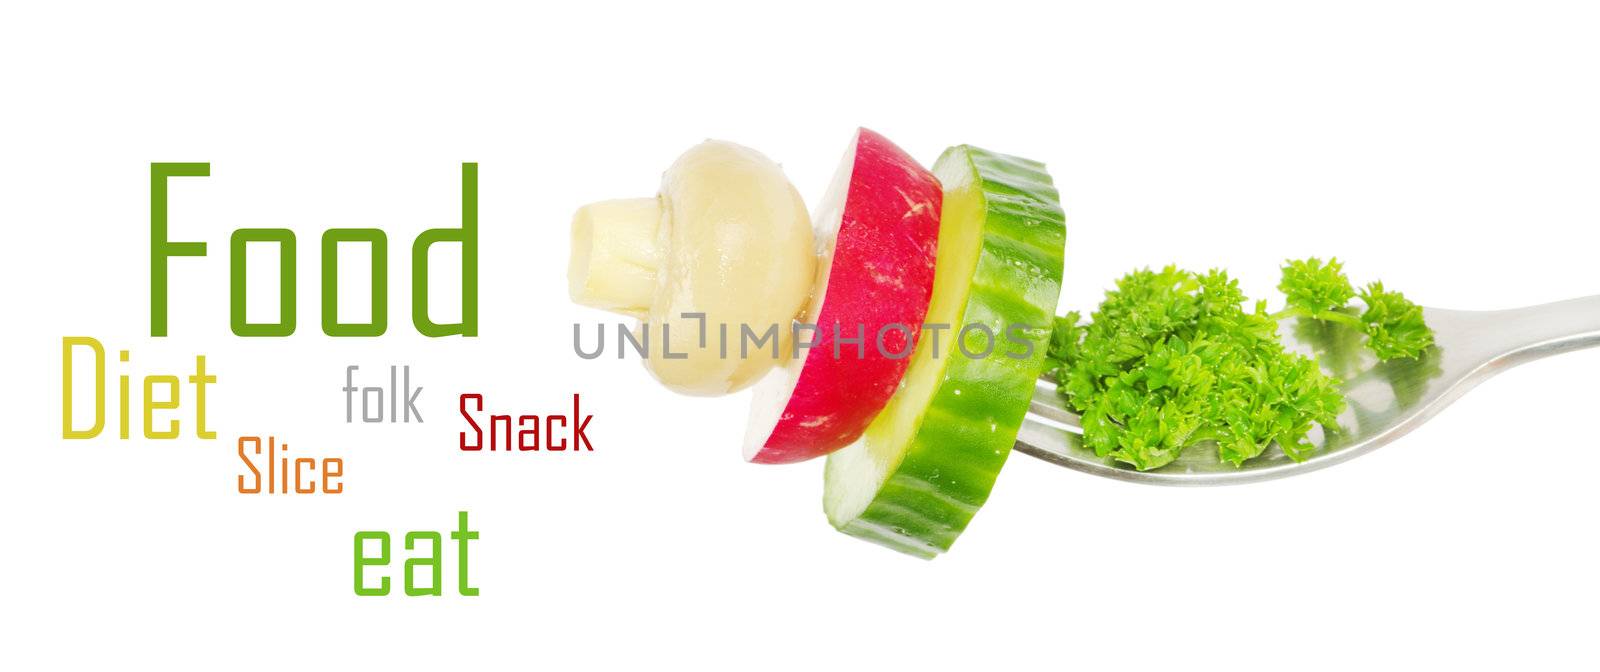 Fresh vegetables on a fork isolated on white background